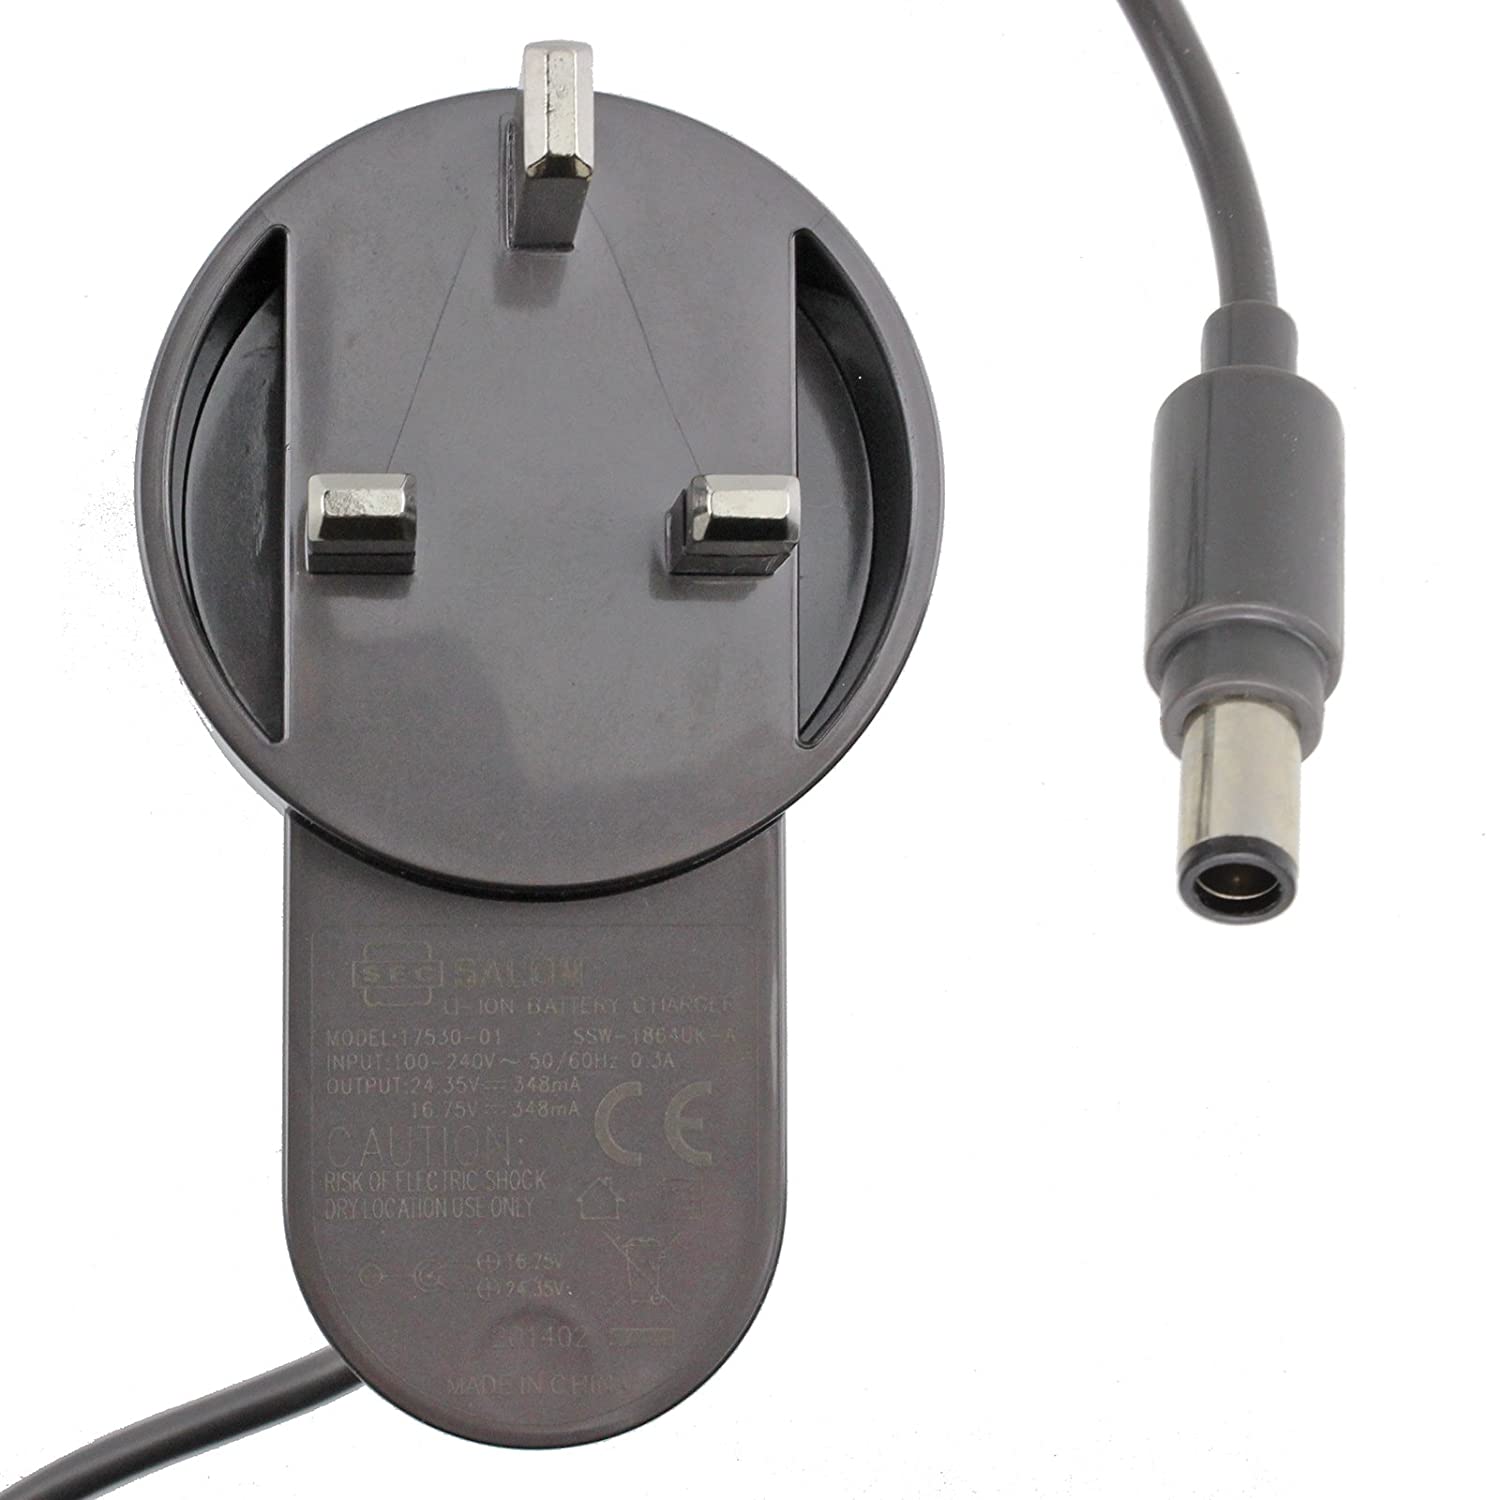 Battery Charger Plug Cable for Dyson DC30 Animal Vacuum Cleaner